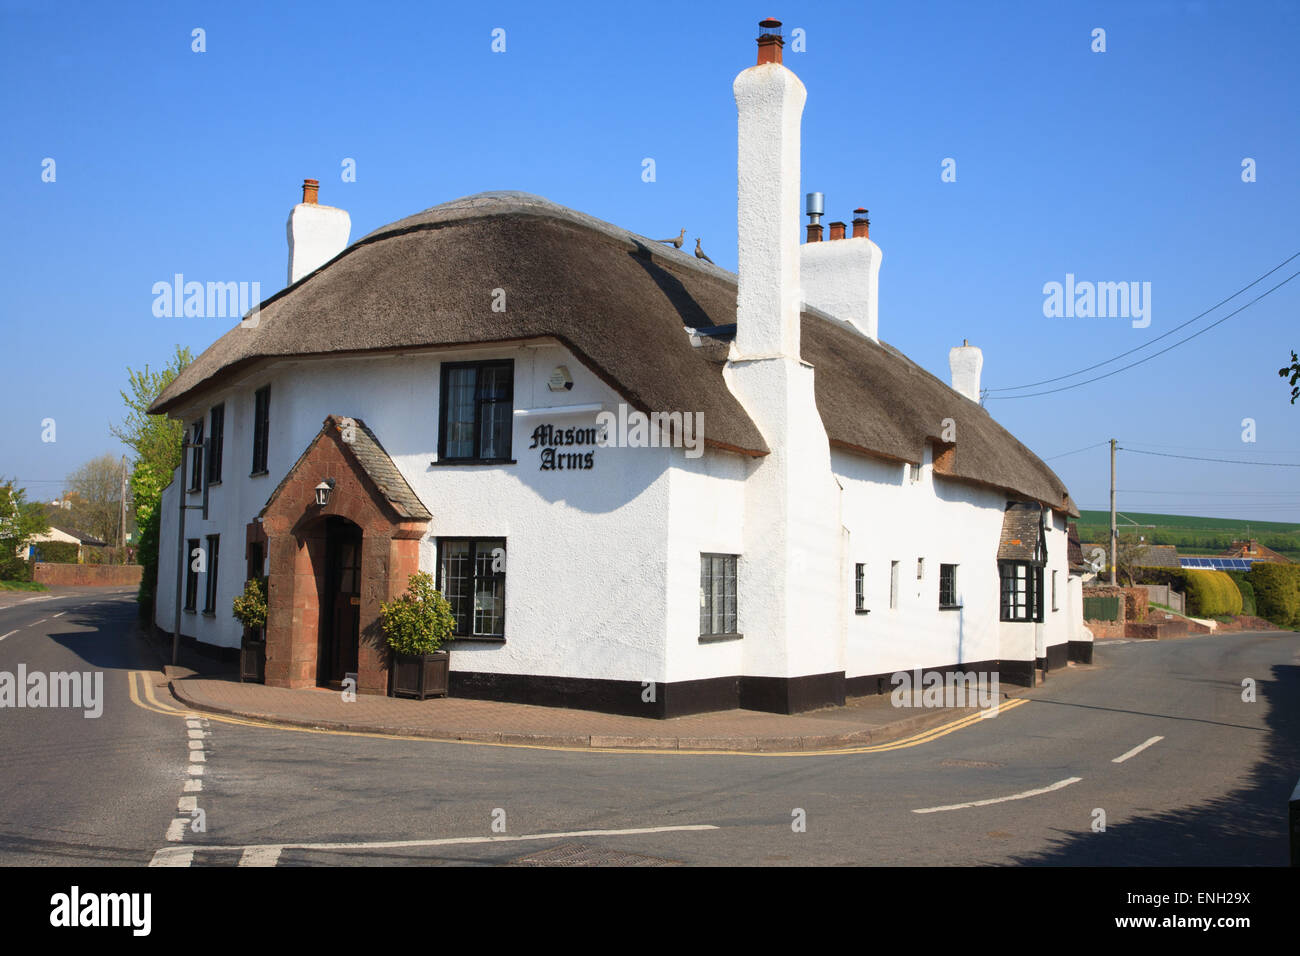 Thatched Masons Arms pub in Williton, West Somerset Stock Photo